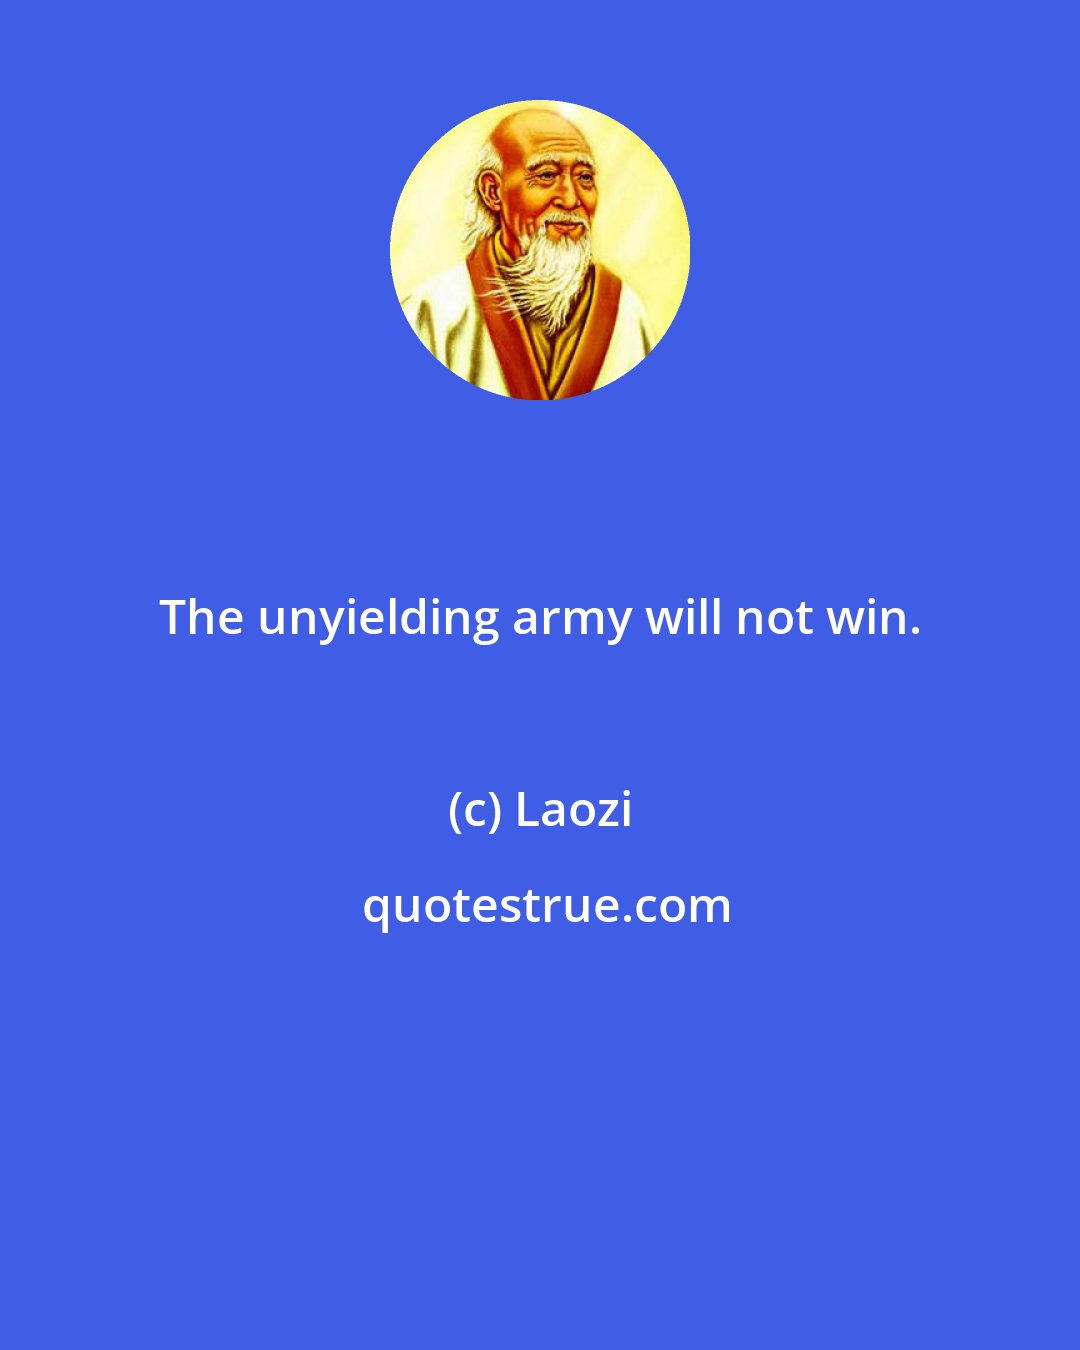 Laozi: The unyielding army will not win.